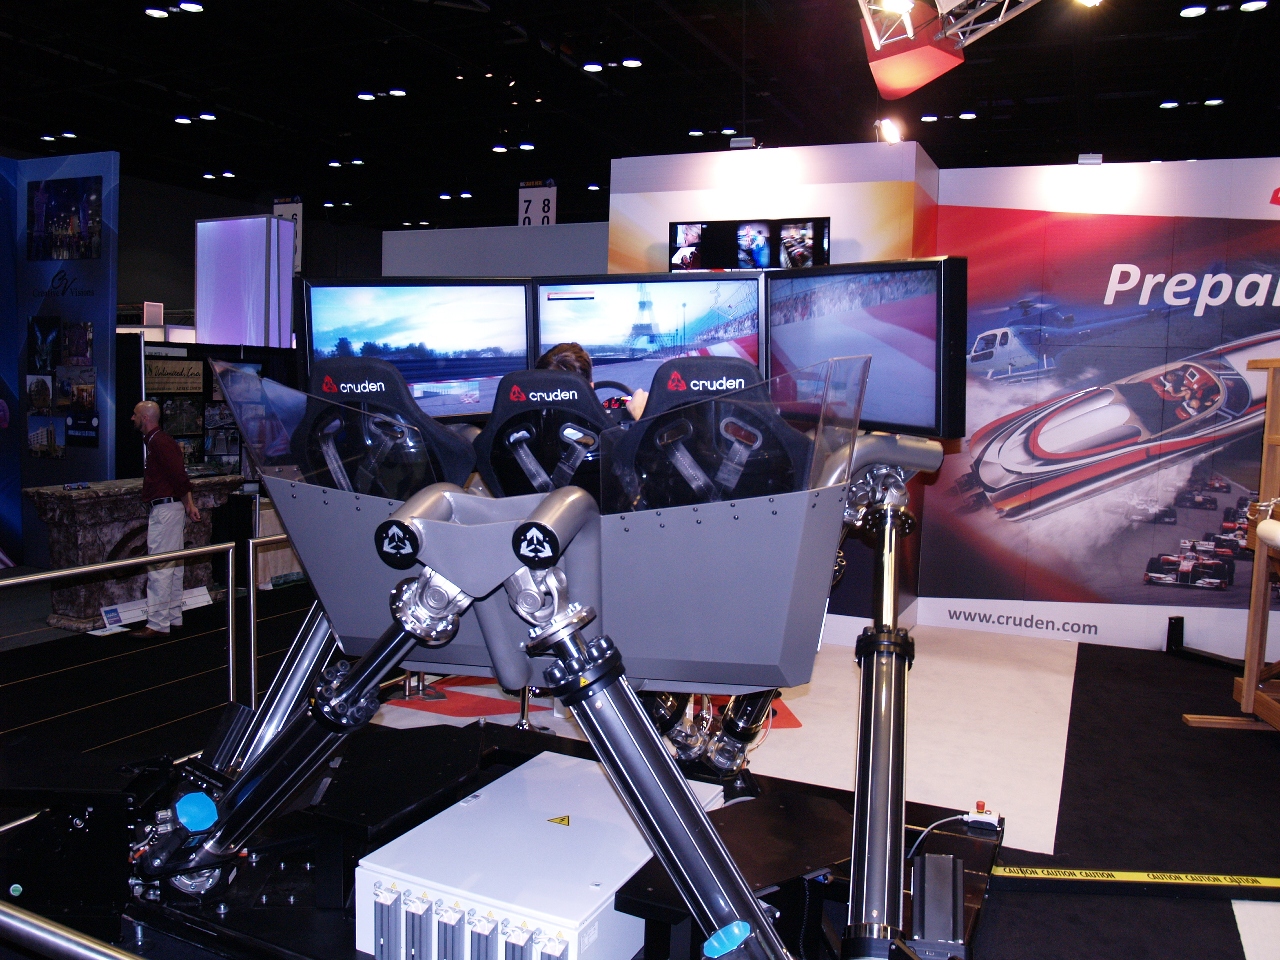 IAAPA 2014 Attraction Expo Review